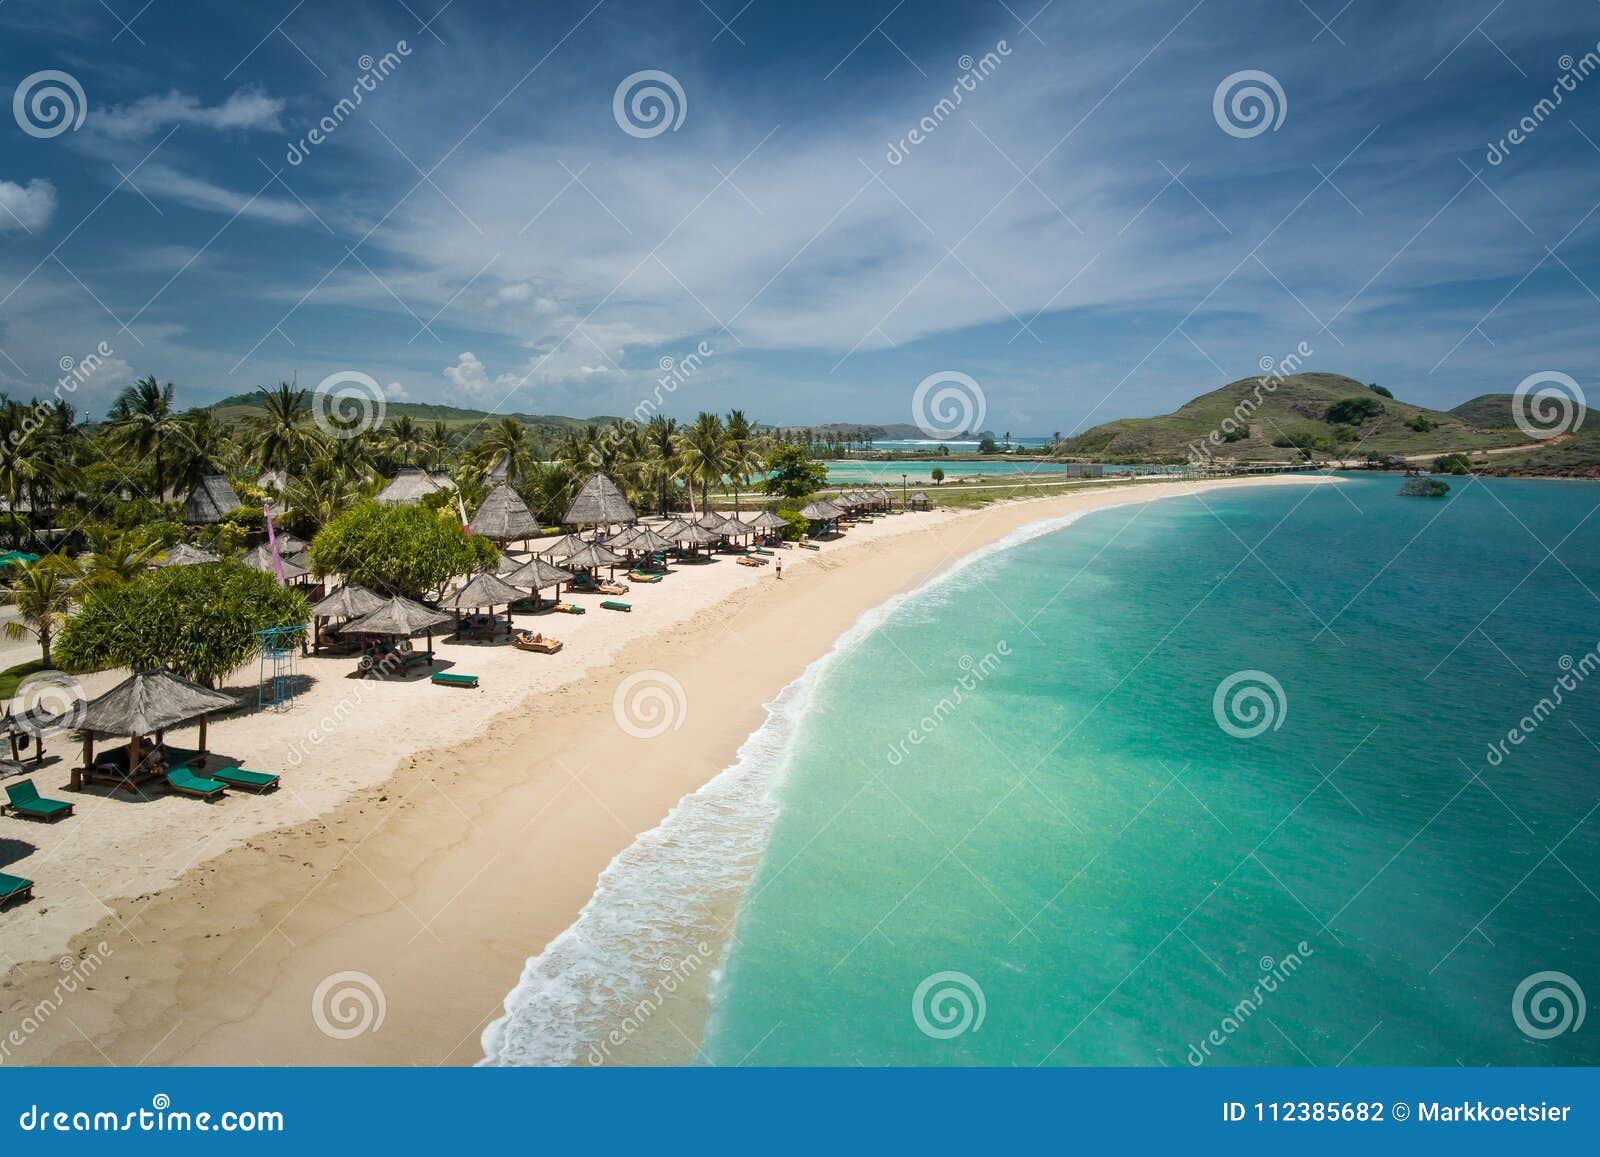 beautiful beach in lombok, indonesia seen from above